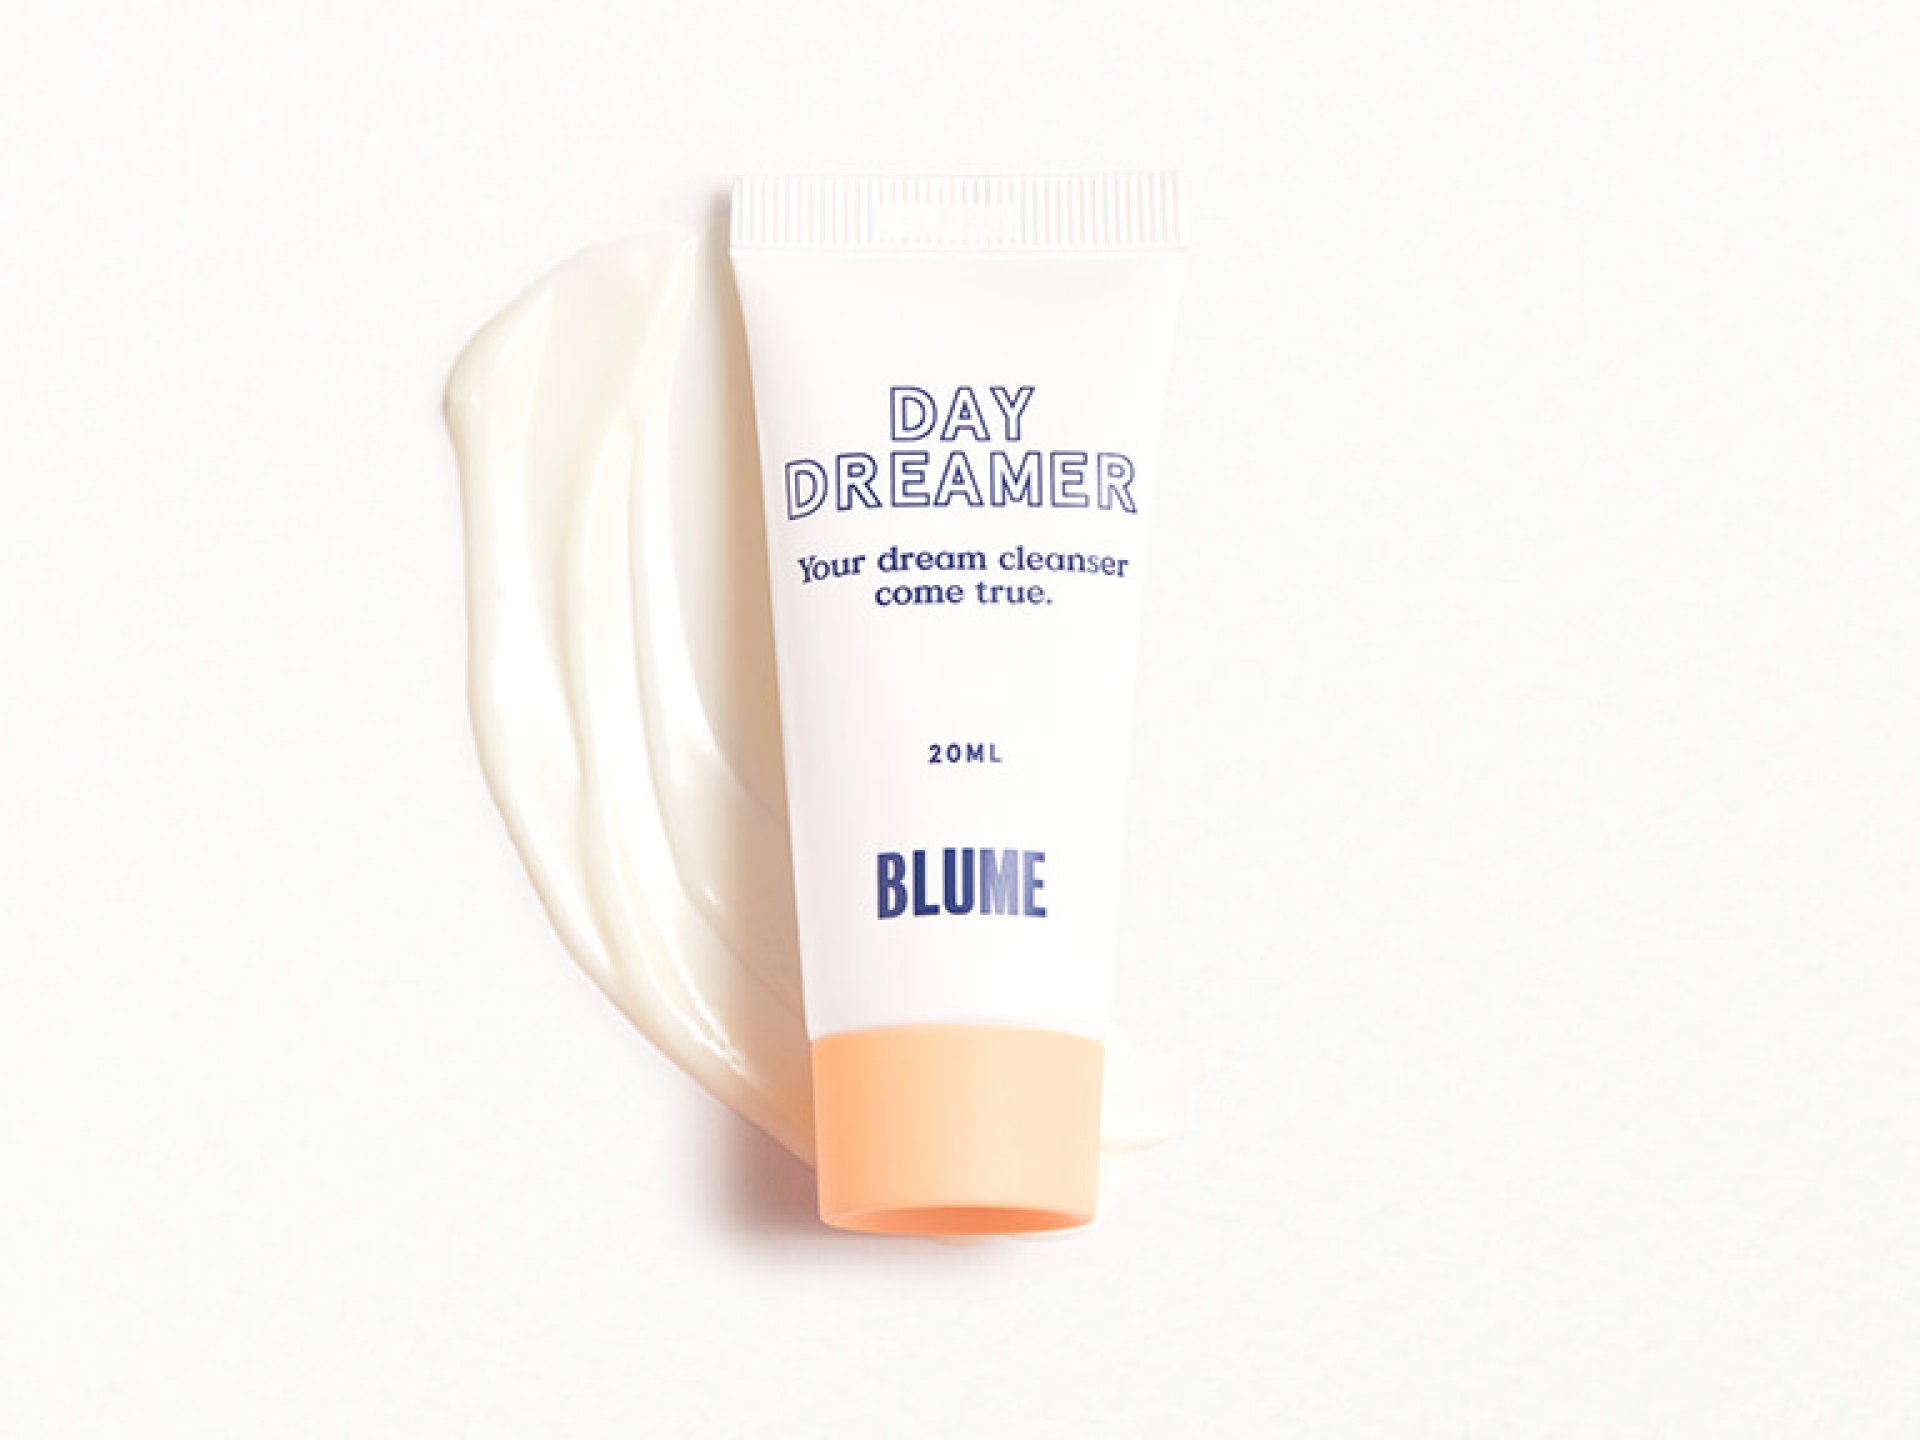 BLUME Daydreamer Gentle Ultra Hydrating Facial Cleanser